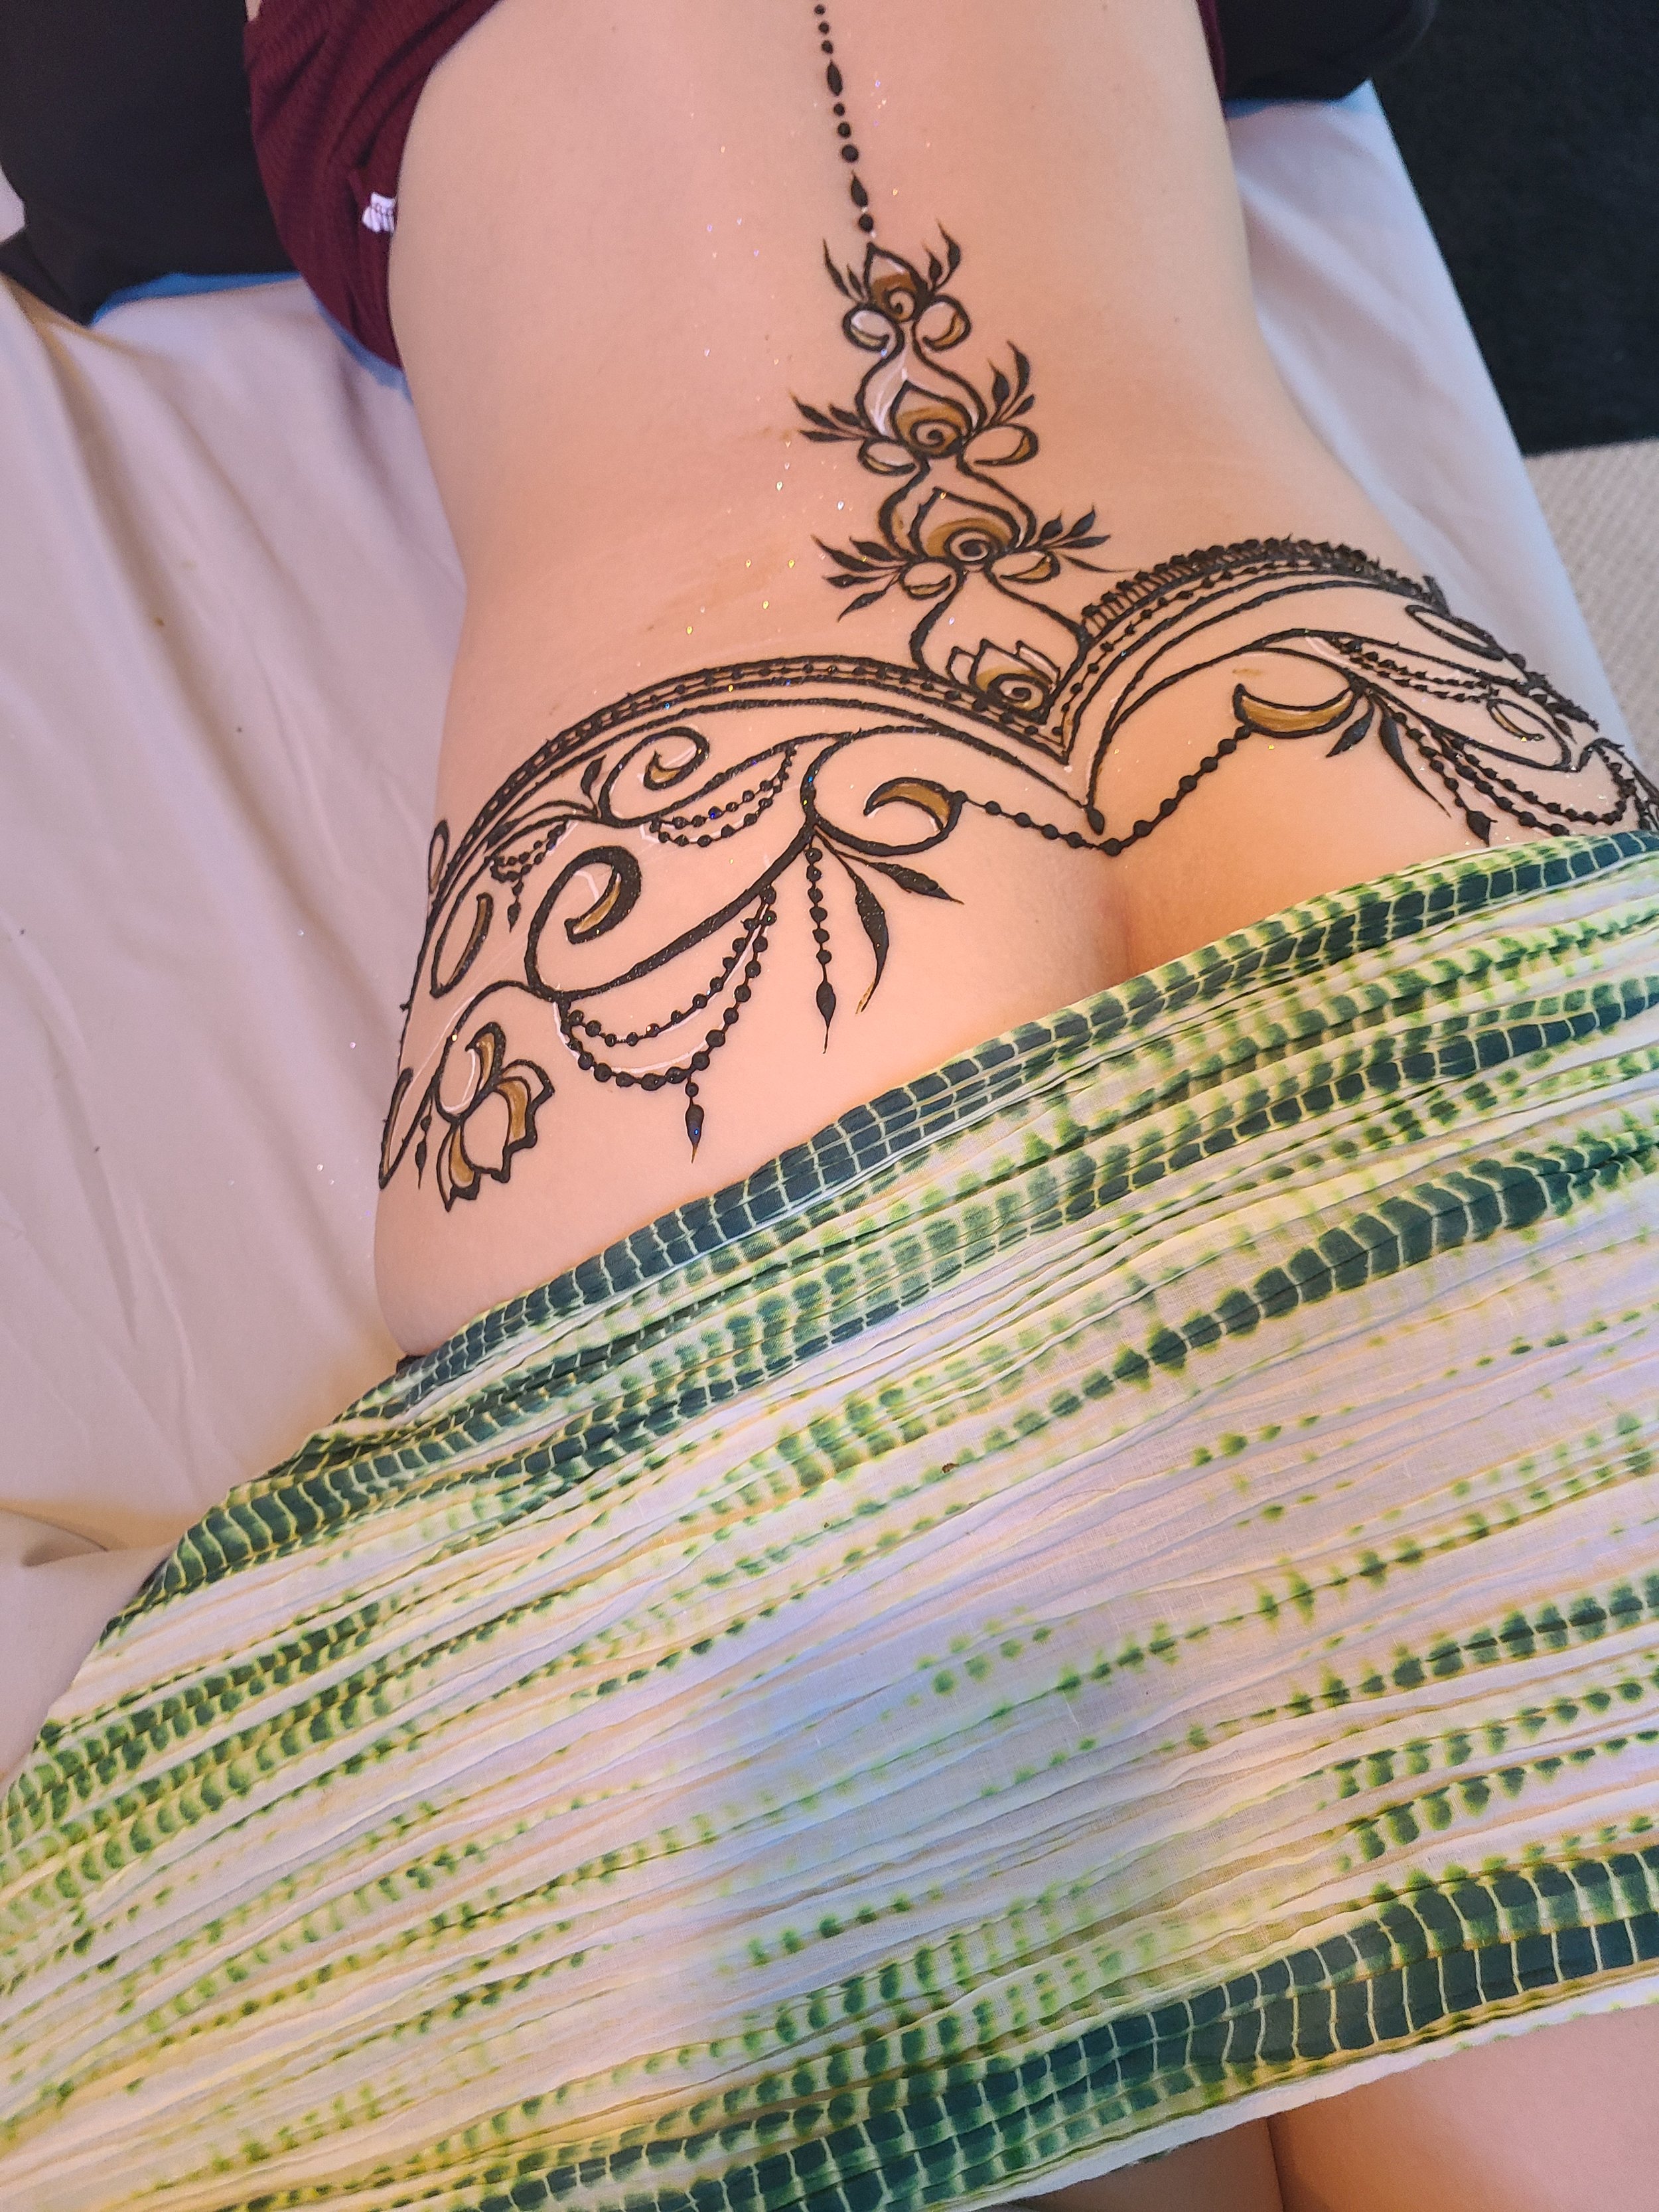 Here Are 7 Small Belly Mehendi Designs That You Must Check Out!